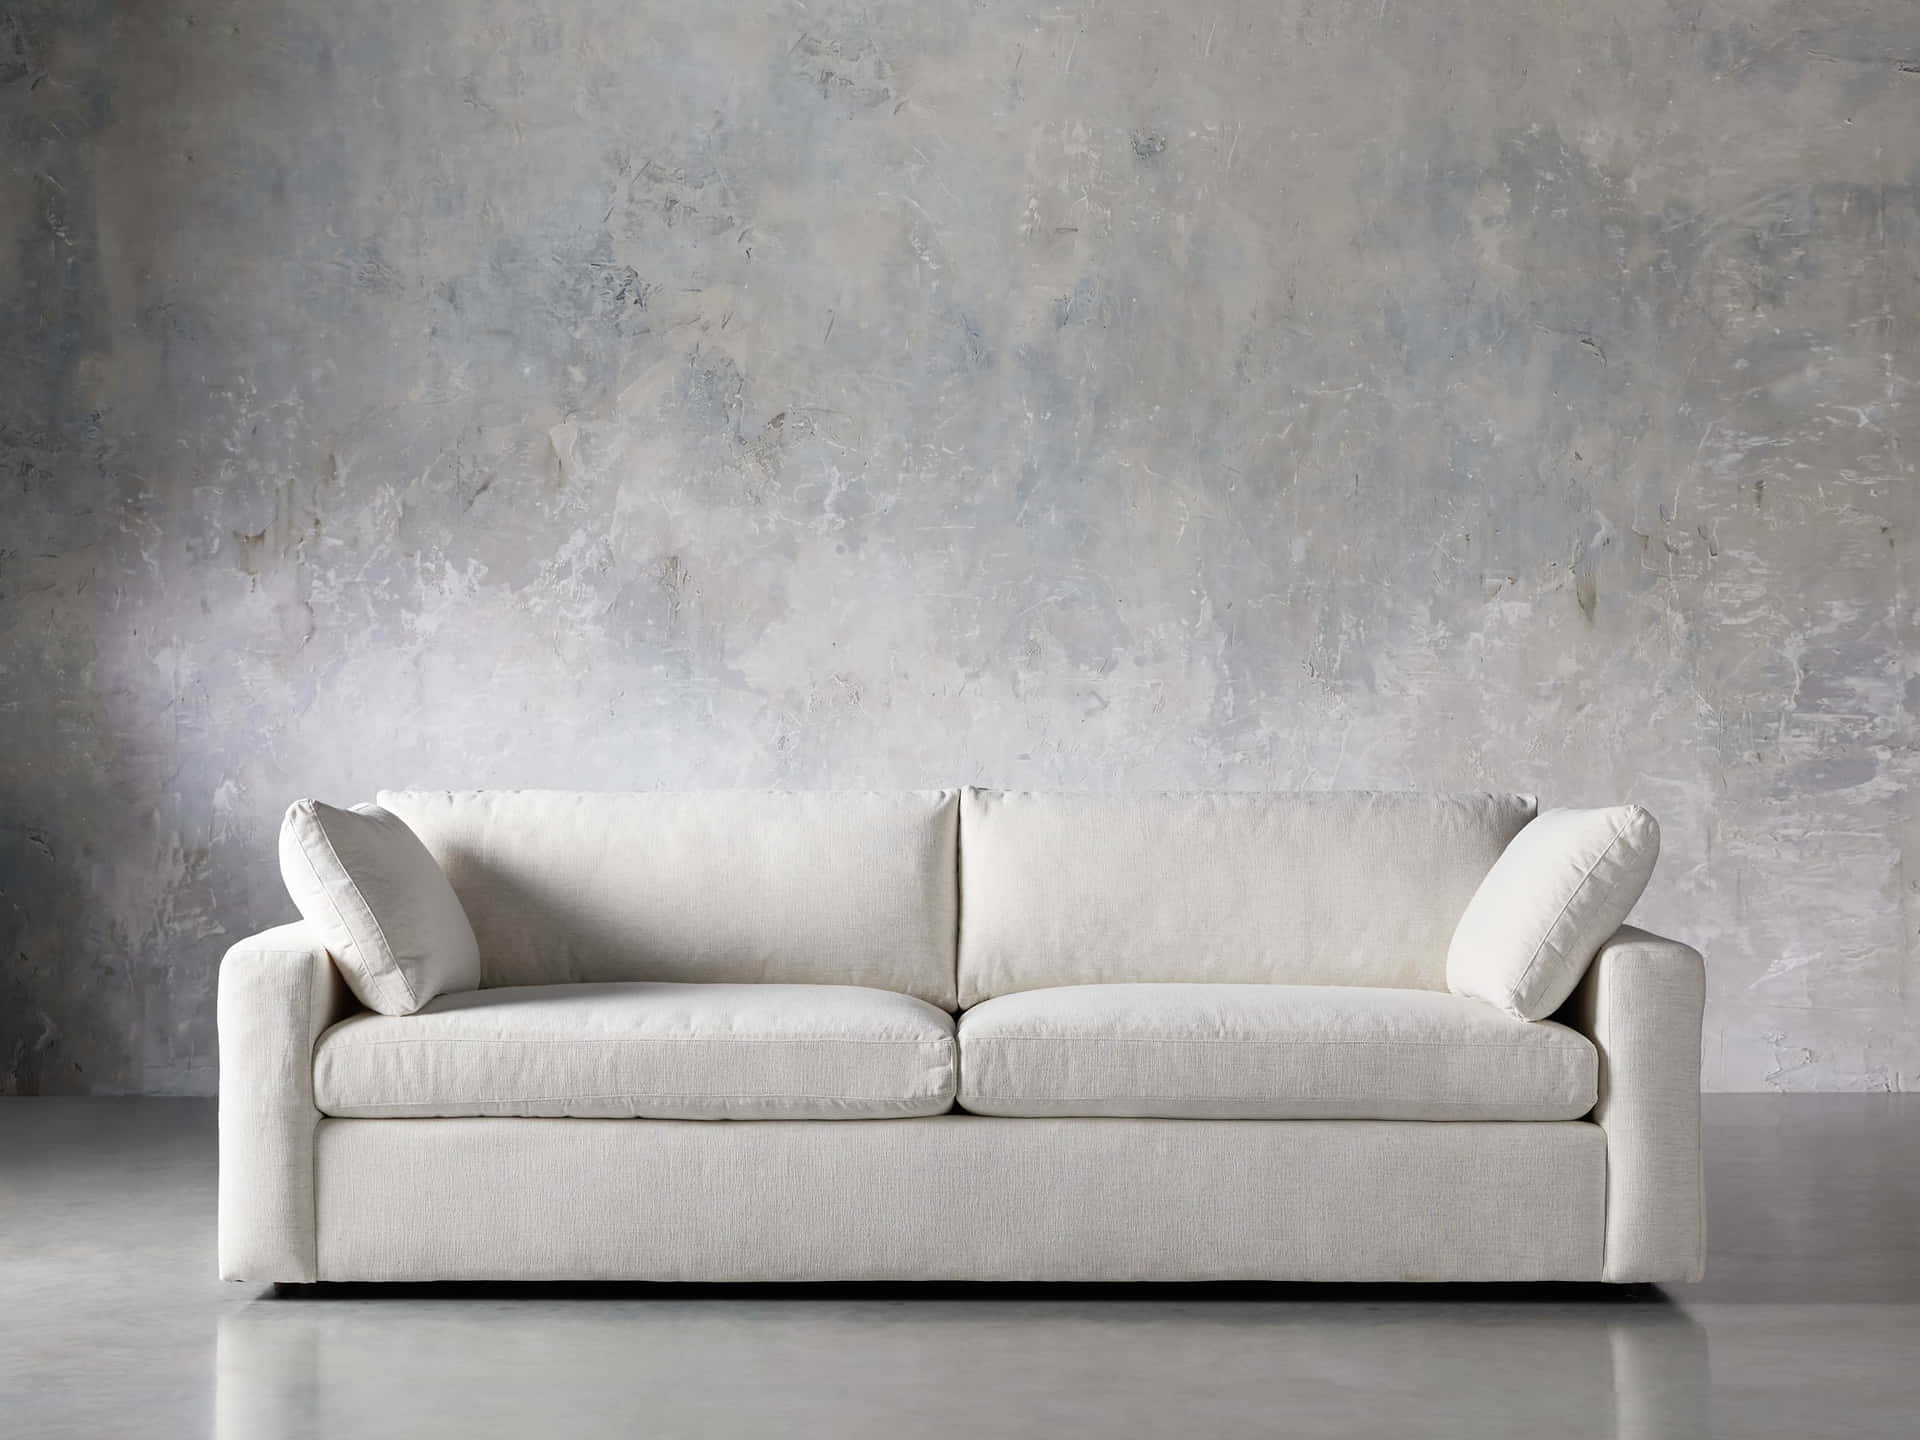 Luxurious White Couch Wallpaper